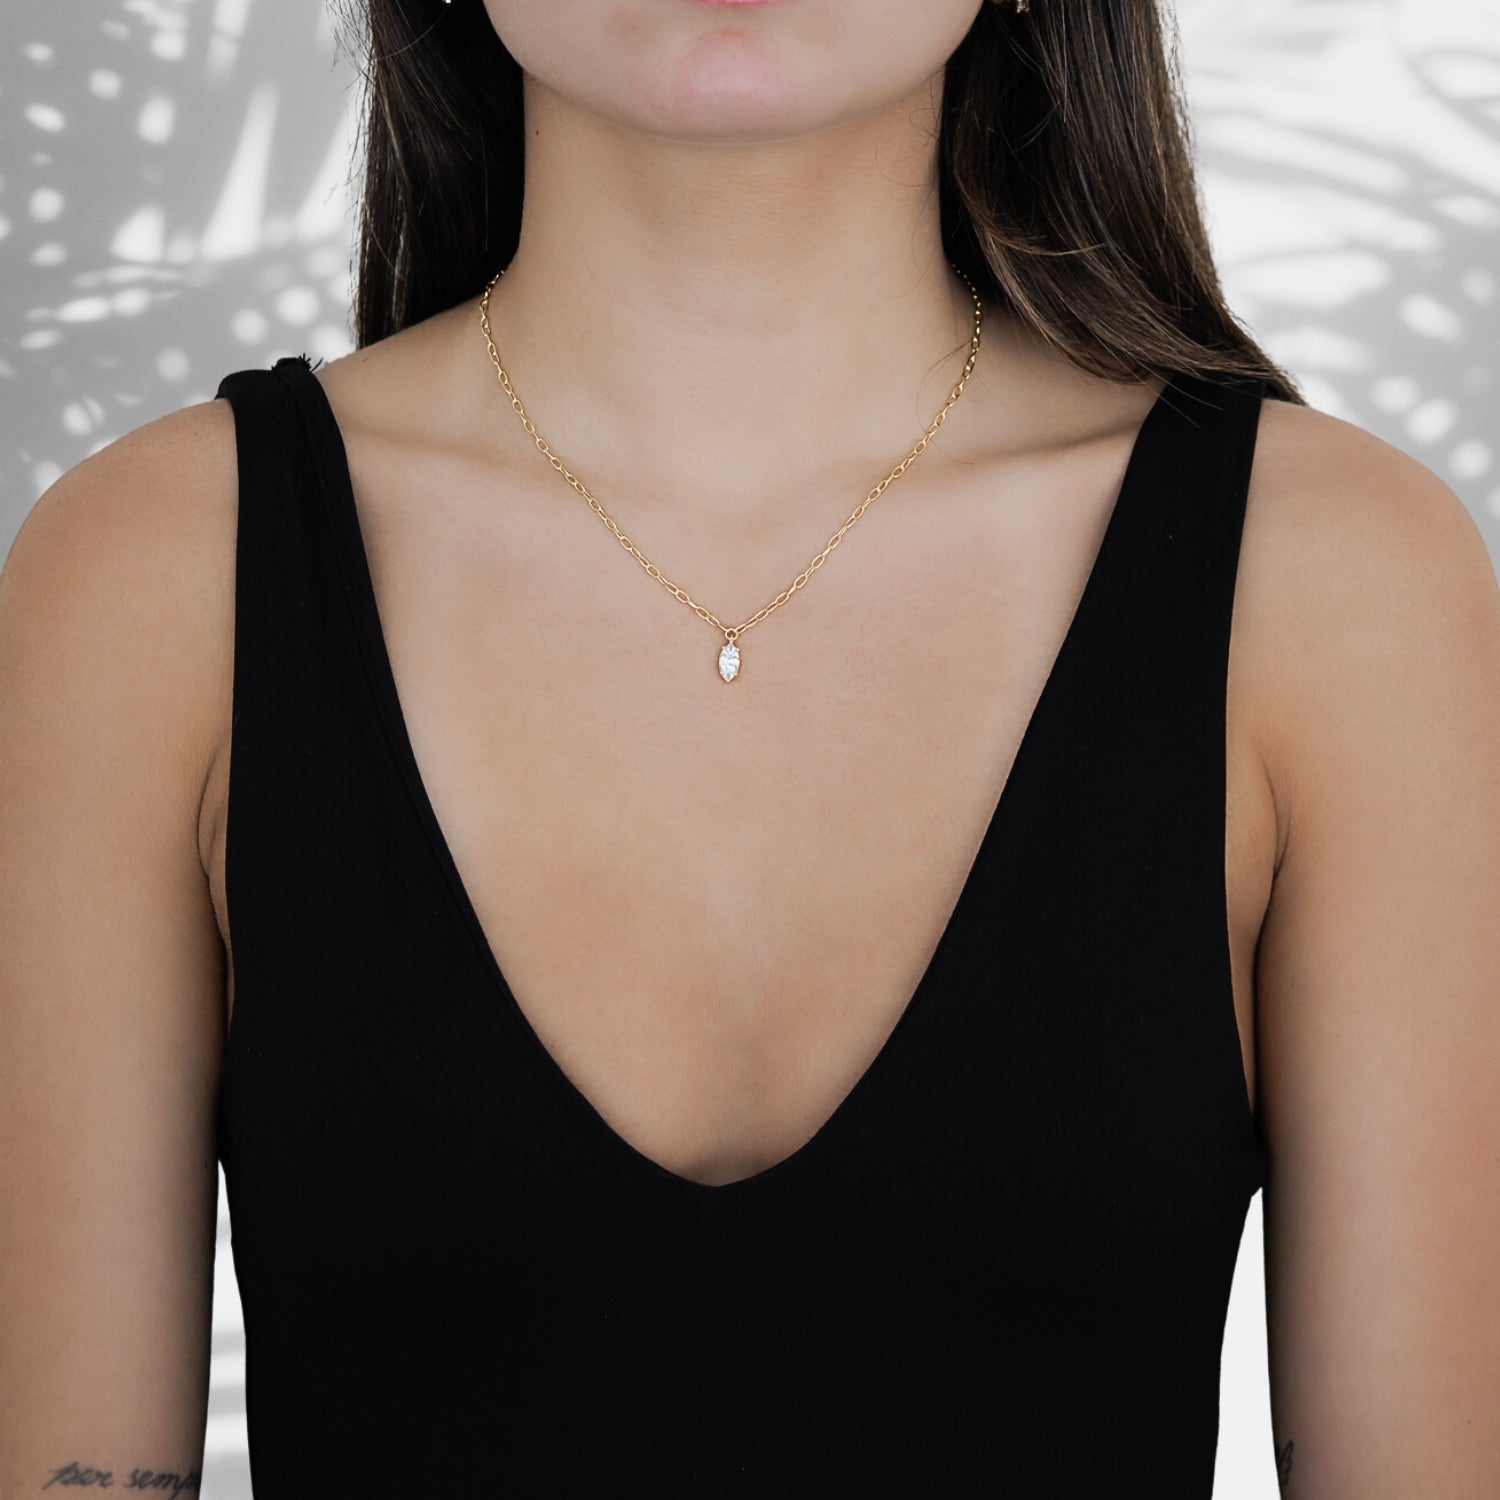 The Gold and Diamond Chain Necklace, a luxurious accessory that enhances the model's natural beauty and style.